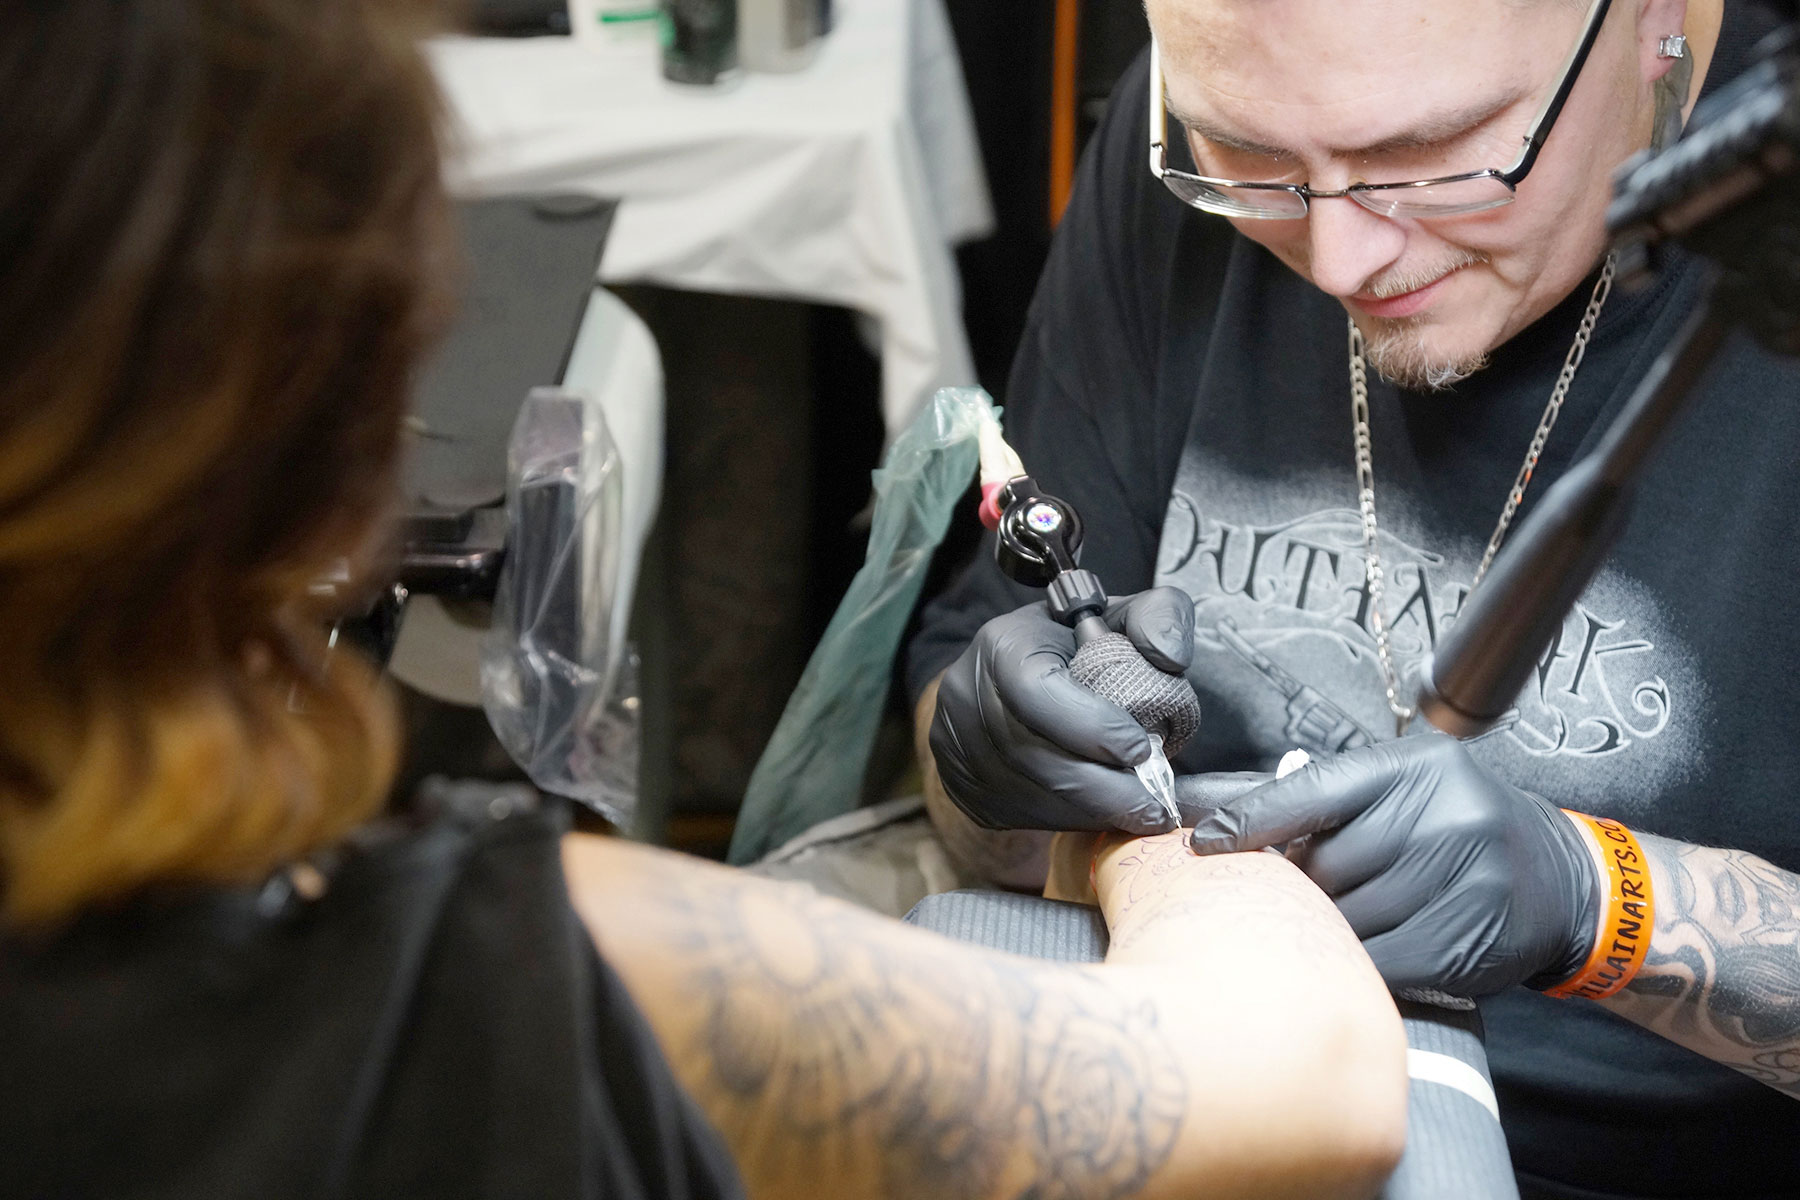 Art collectors get colorful body modifications with tattoos at annual